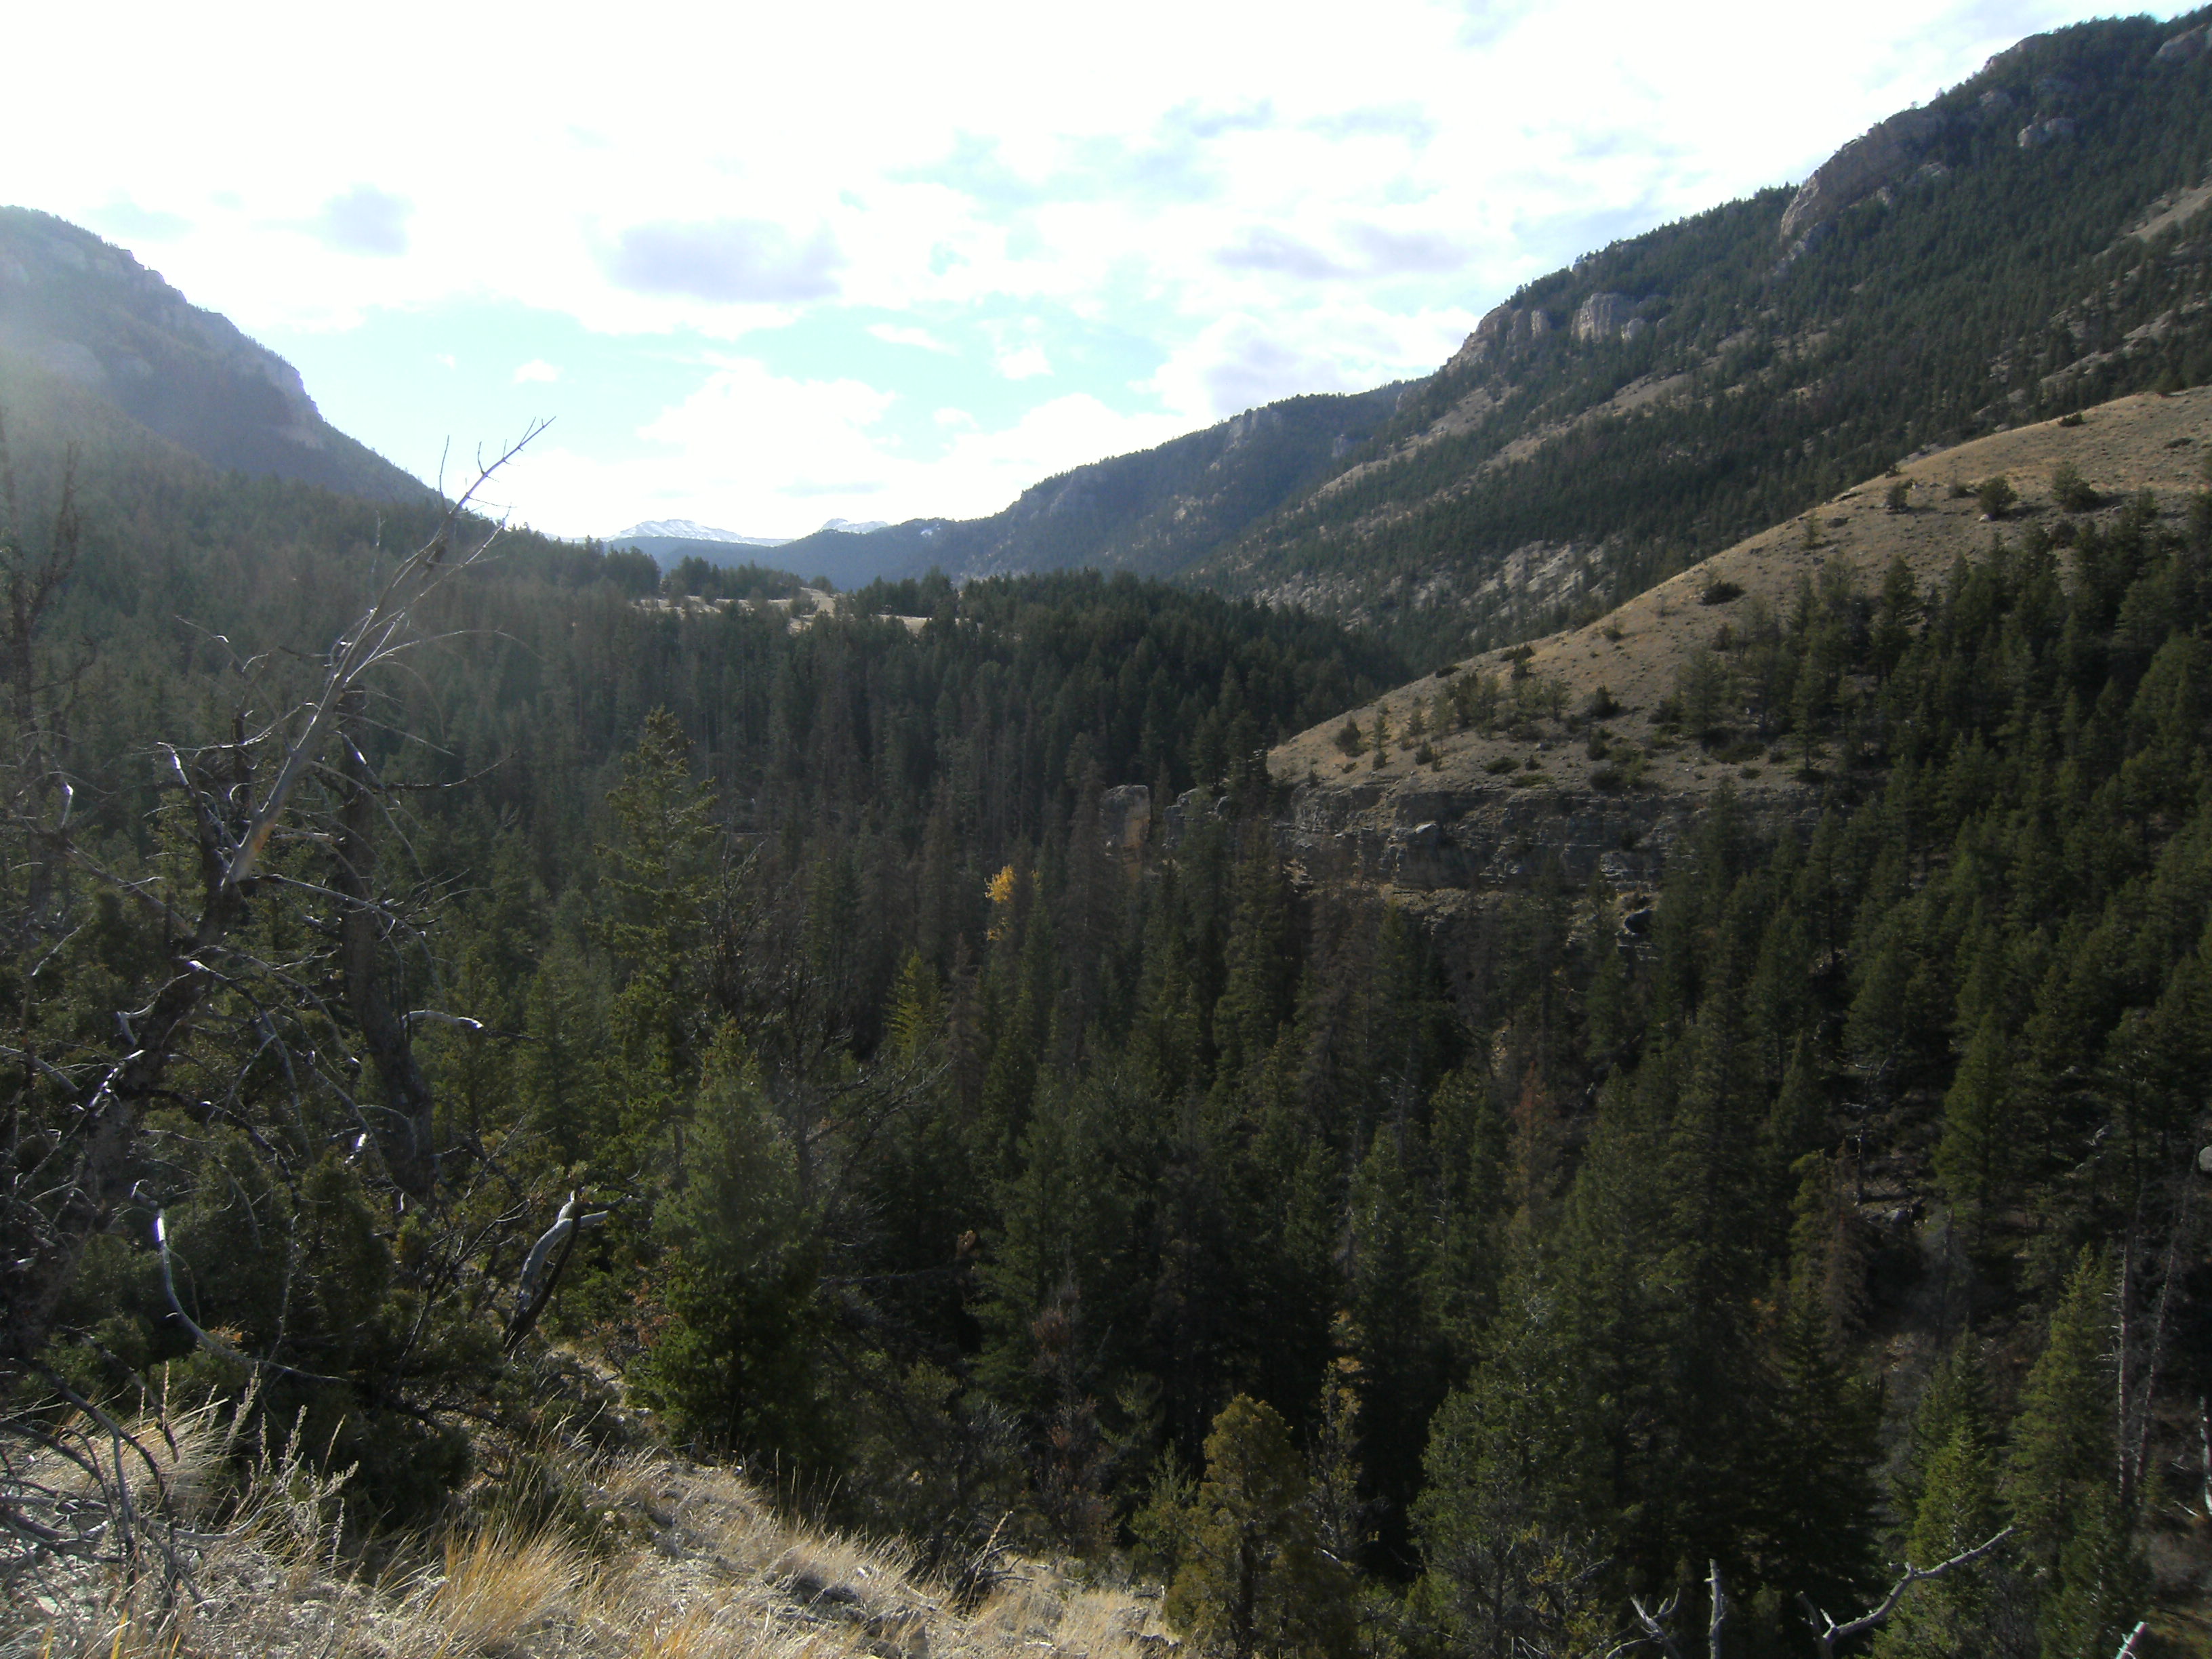 Looking into Dead Indian Valley